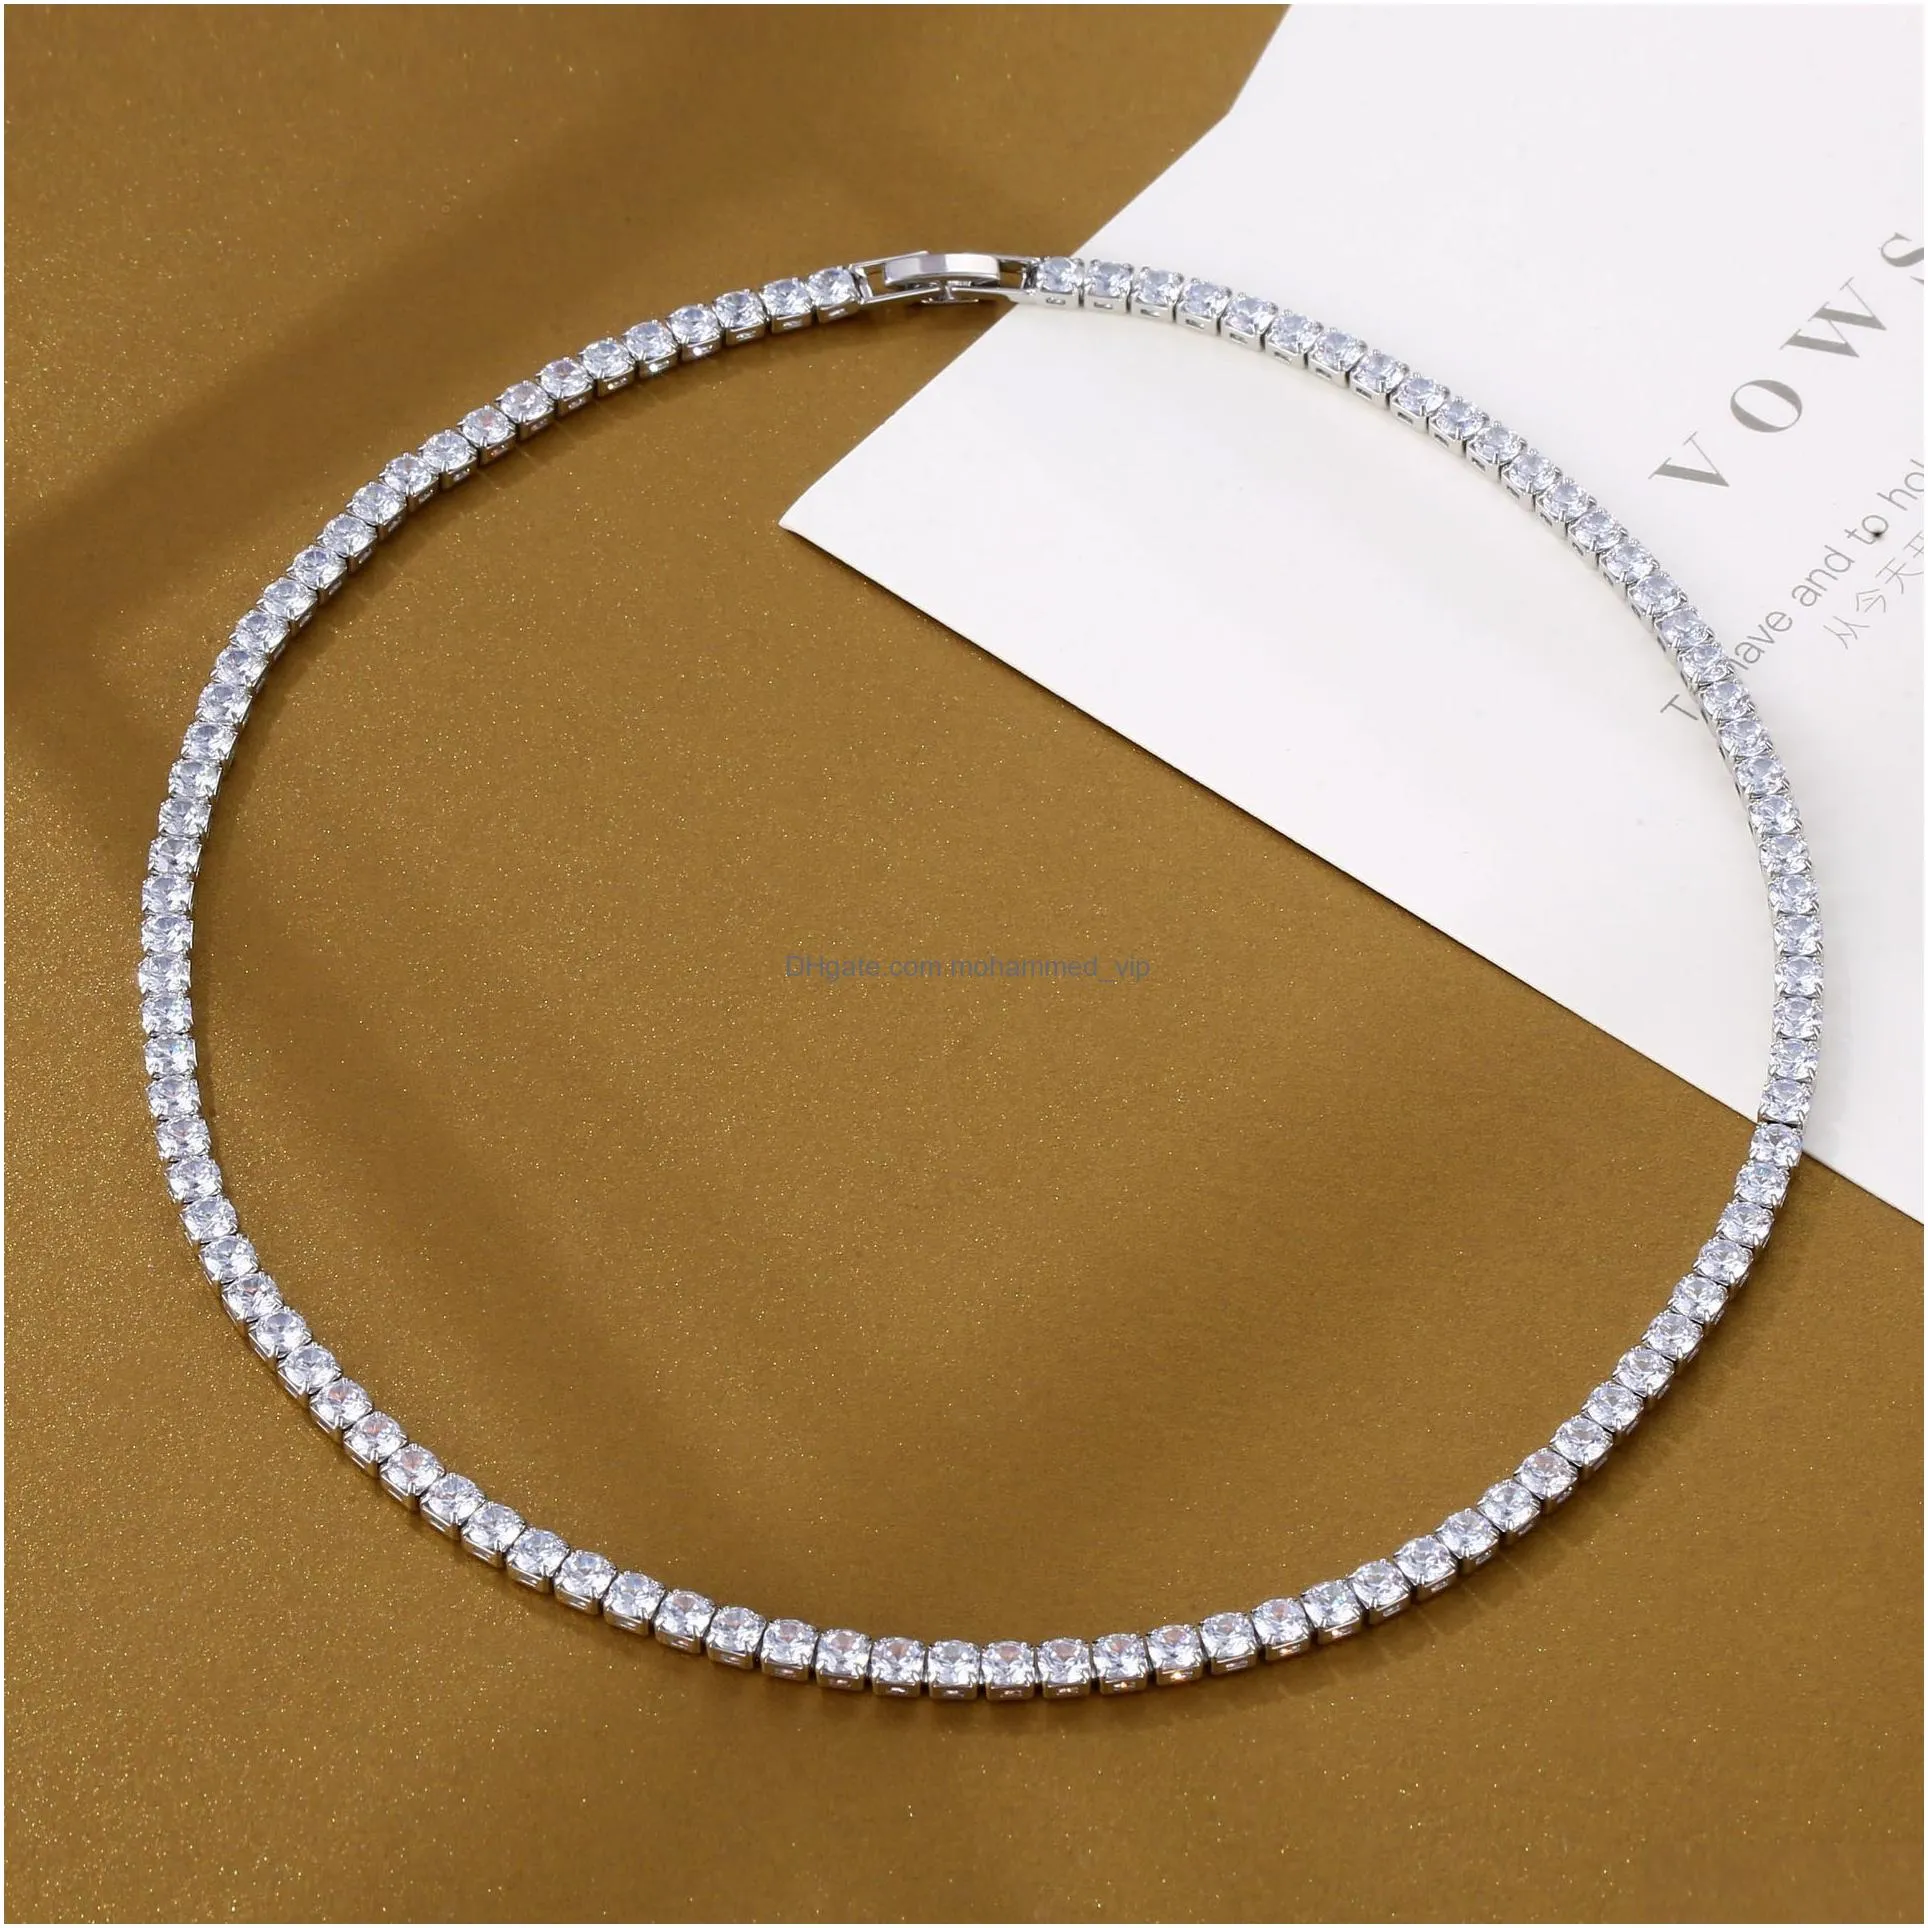 necklace bracelet pass diamond tester iced out bling moissanite diamond hip hop jewelry 925 silver tennis chain -1